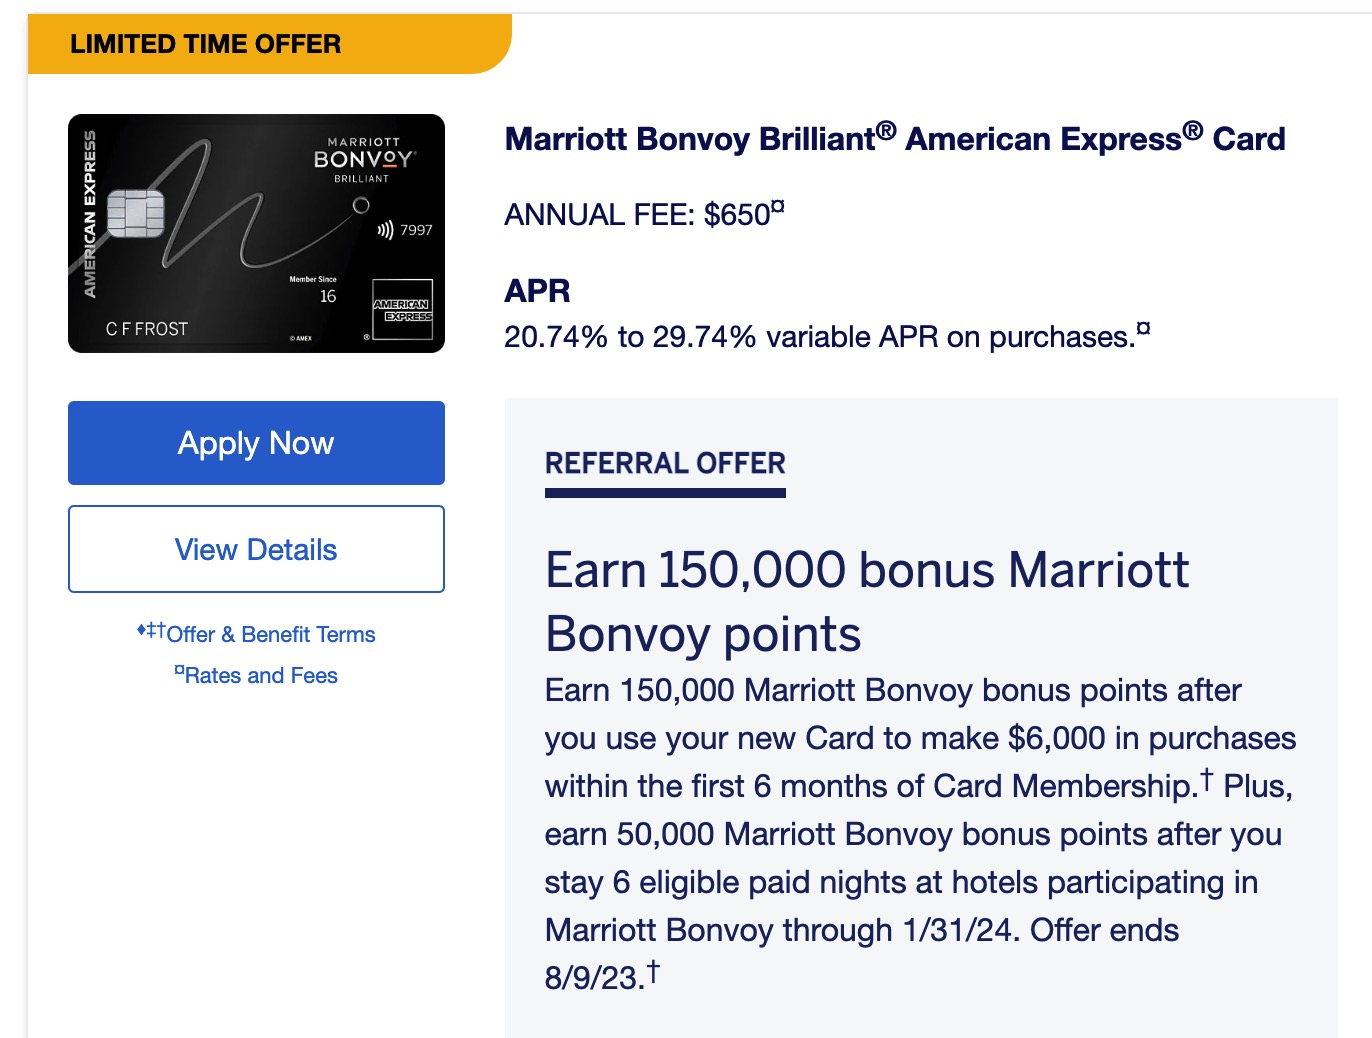 The Current Best US Credit Card, Bank referral offers and more